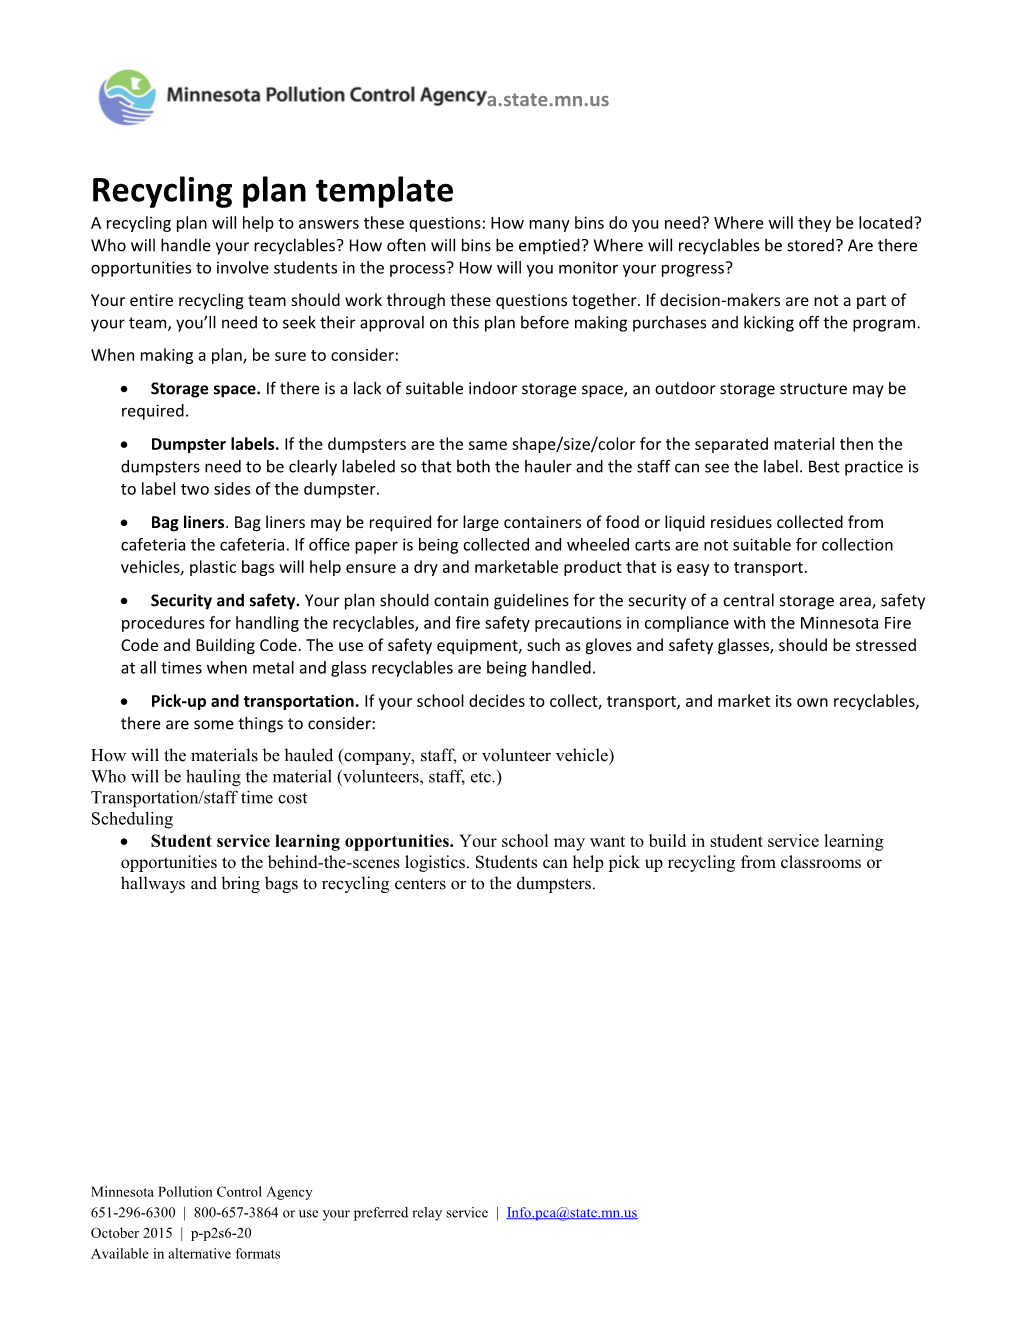 Recycling Plan Template